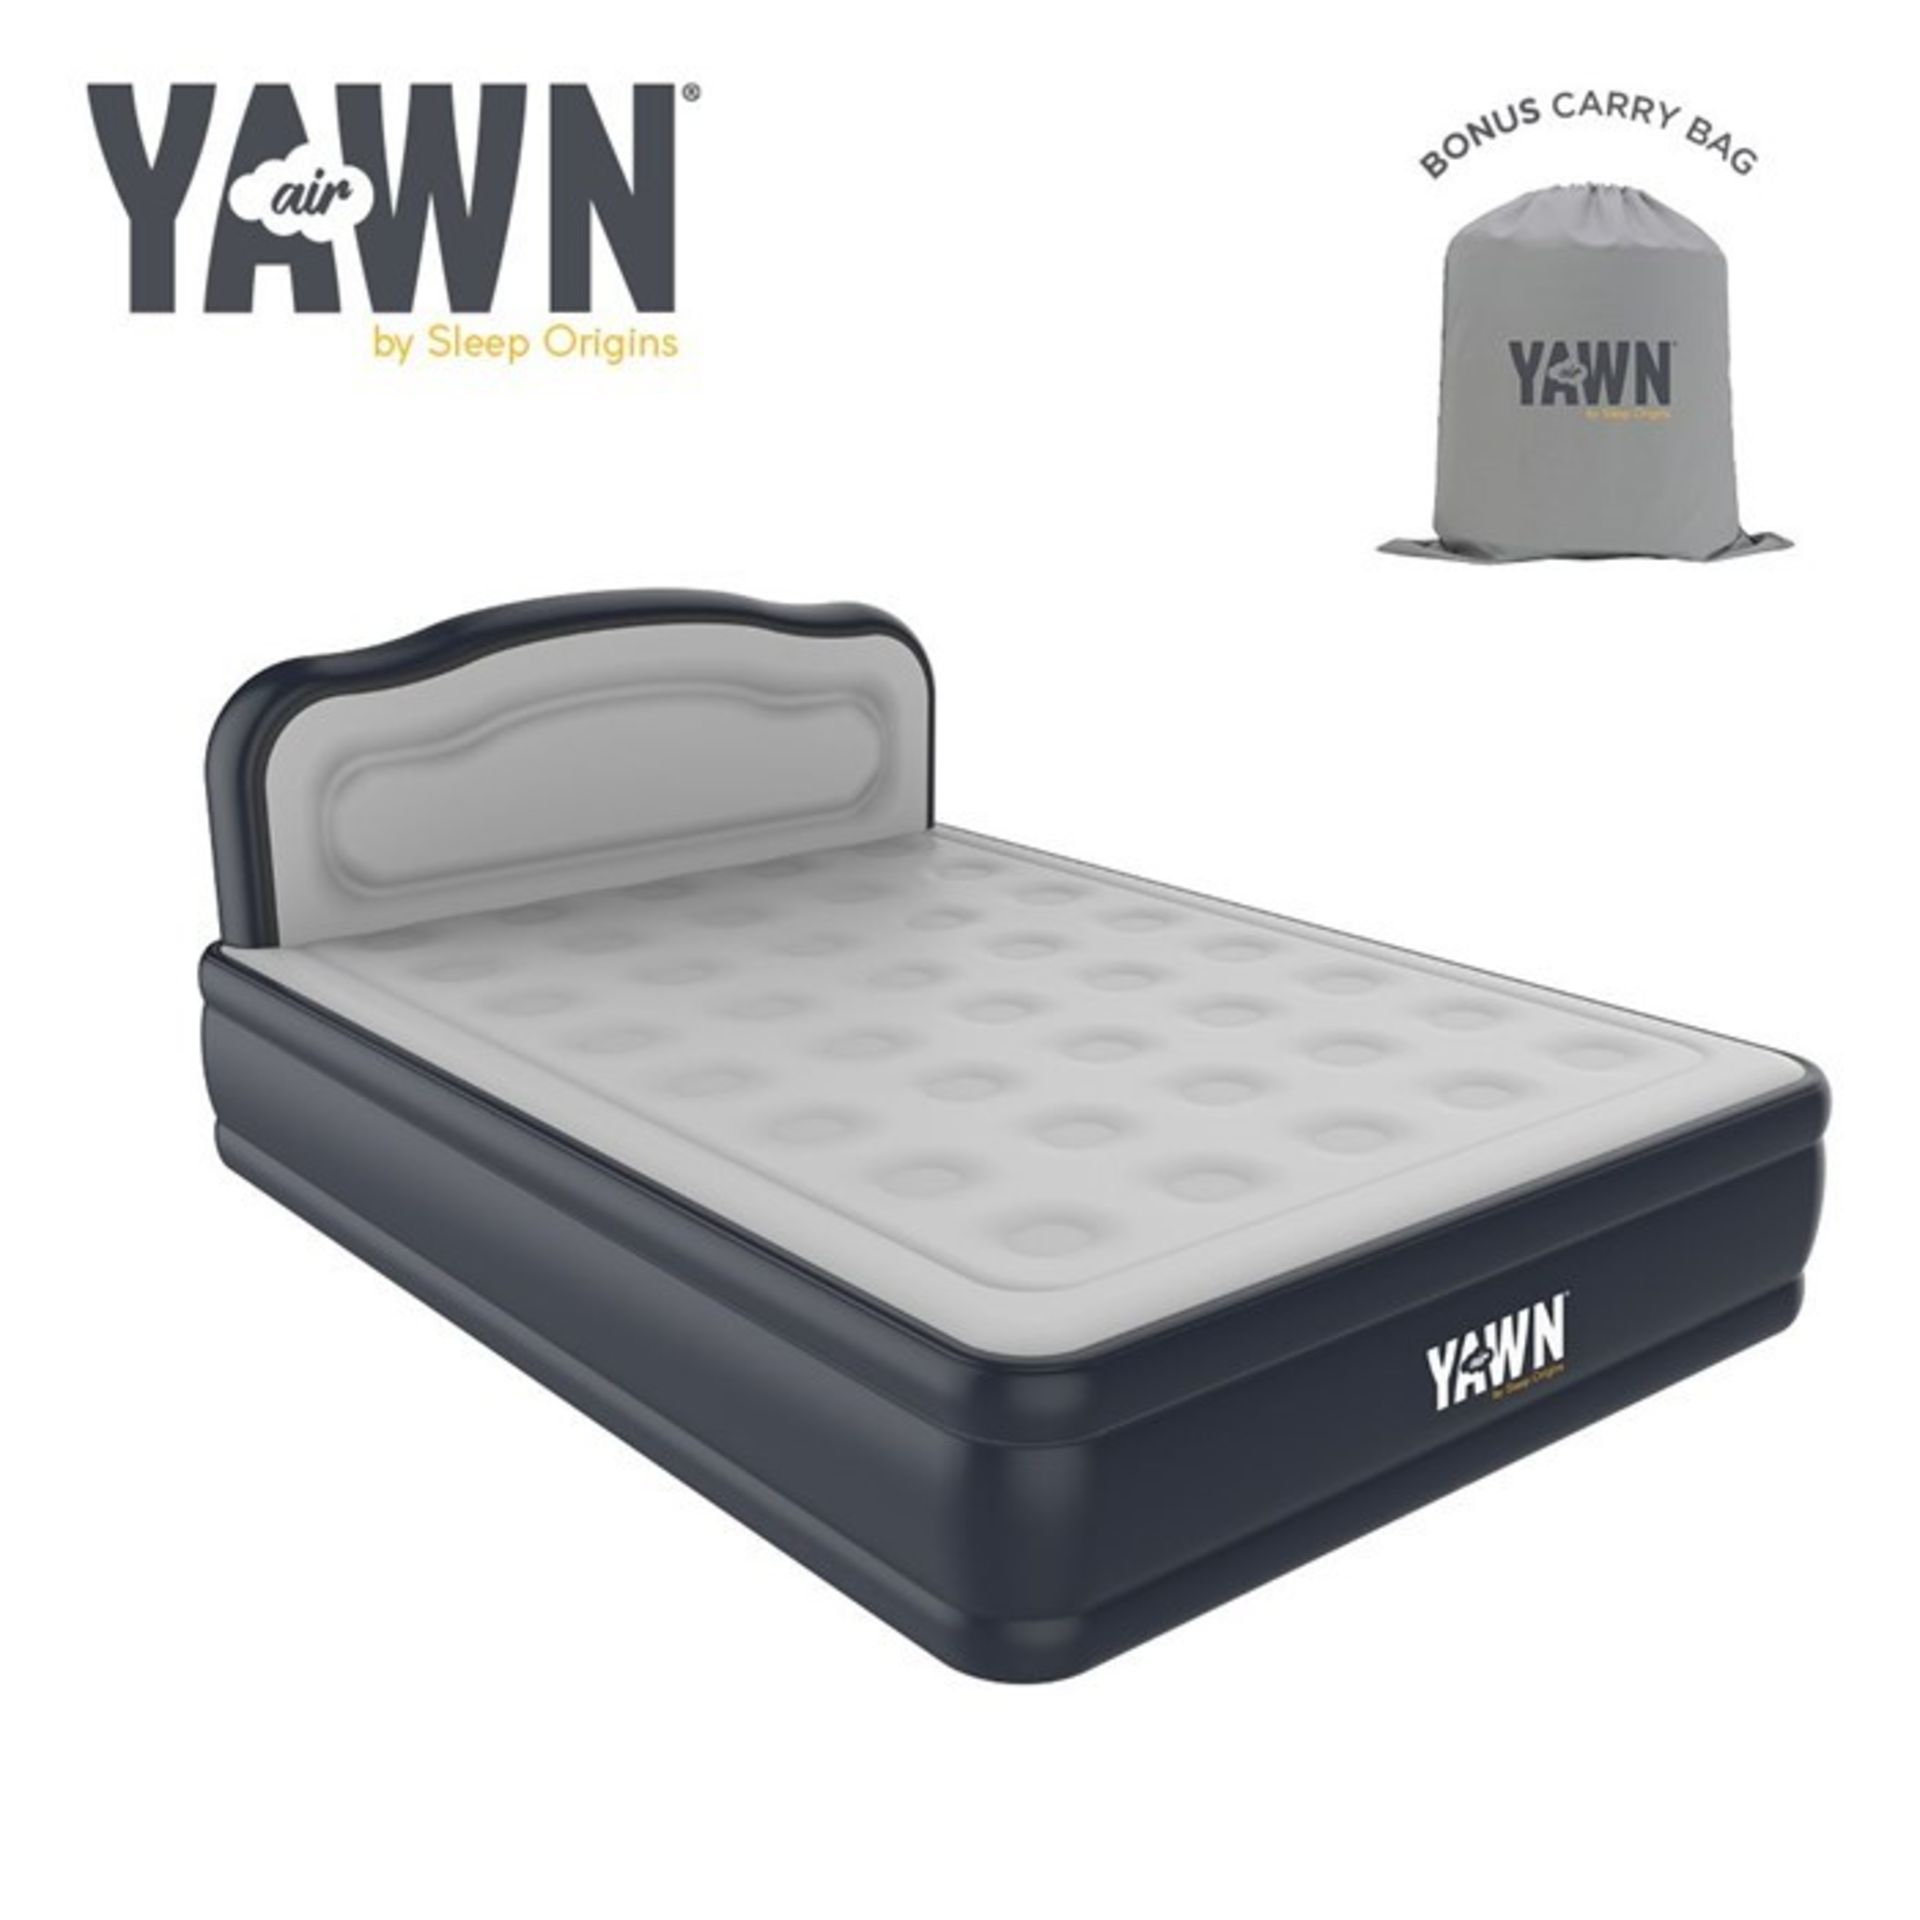 | 10X | YAWN AIR BEDS, VARIOUS SIZES PICKED AT RANDOM FROM PALLETS, ALL CUSTOMER RETURNS | BOXED AND